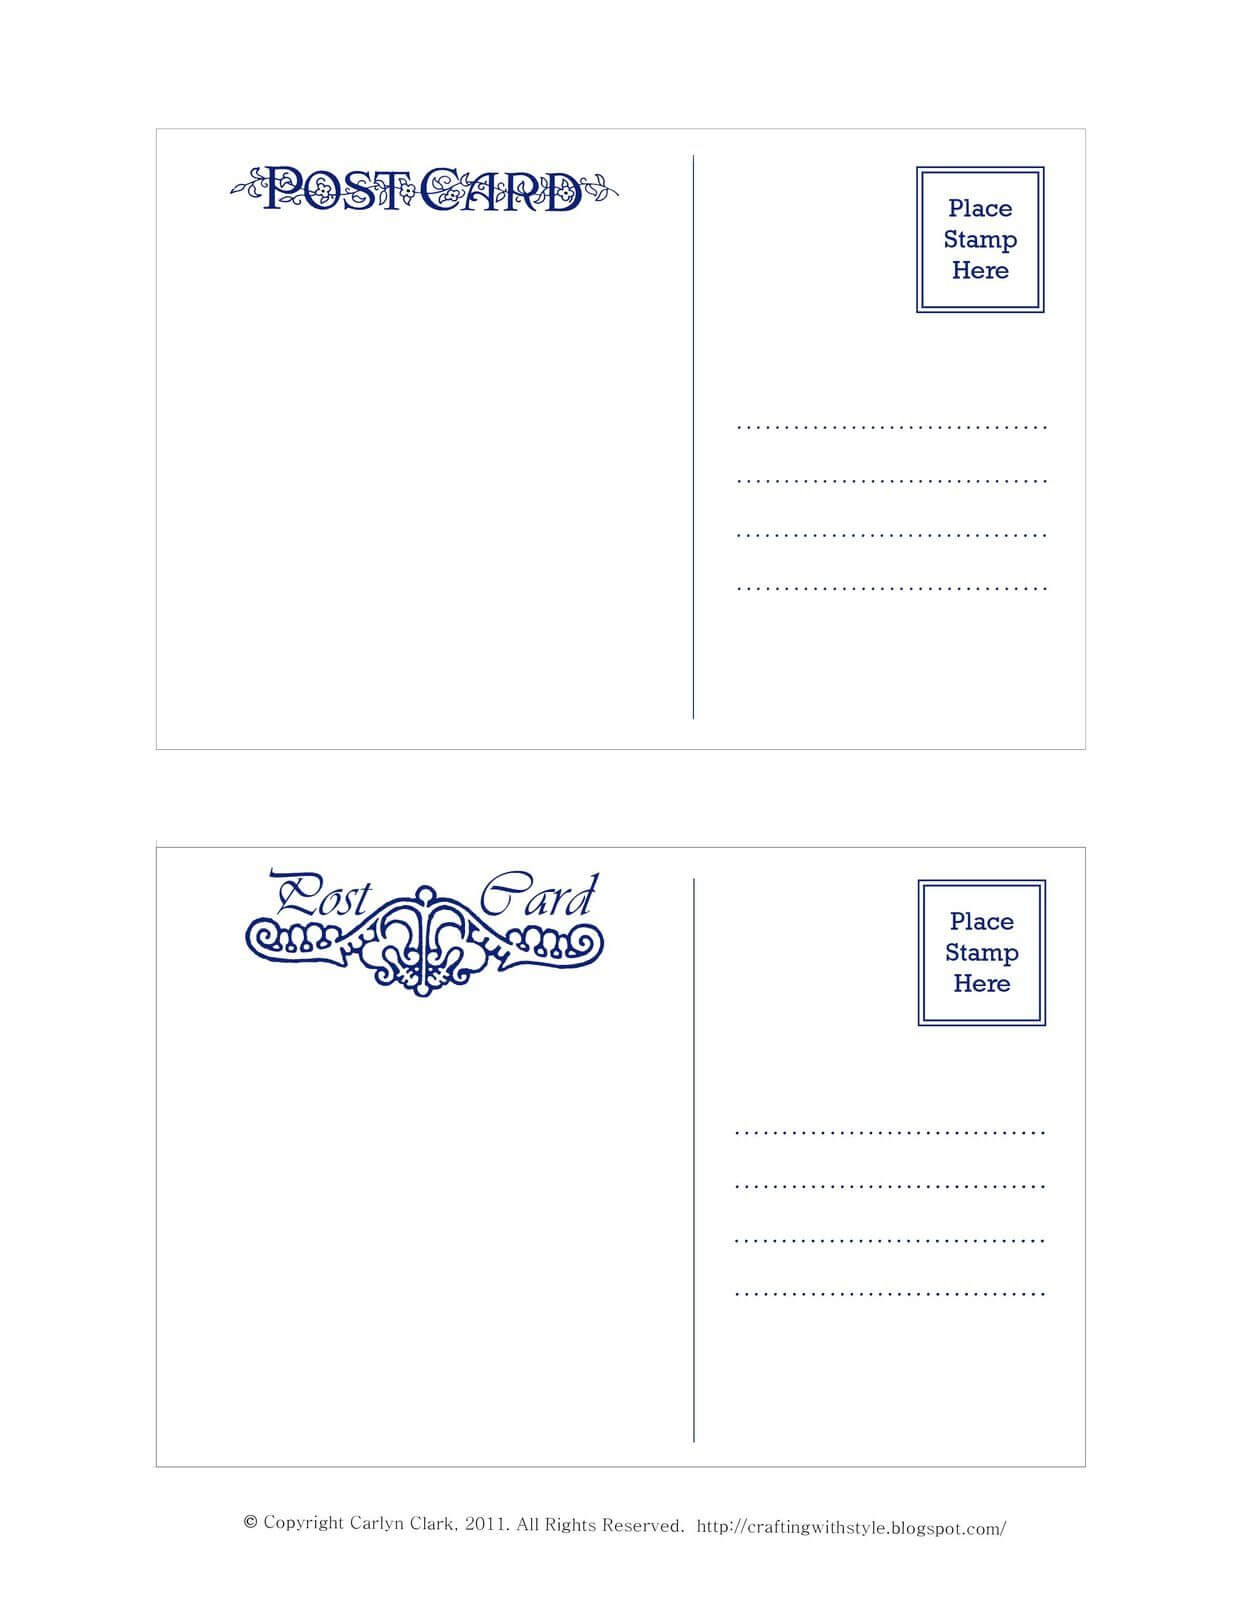 Crafting With Style: Free Postcard Templates | Free Regarding Post Cards Template